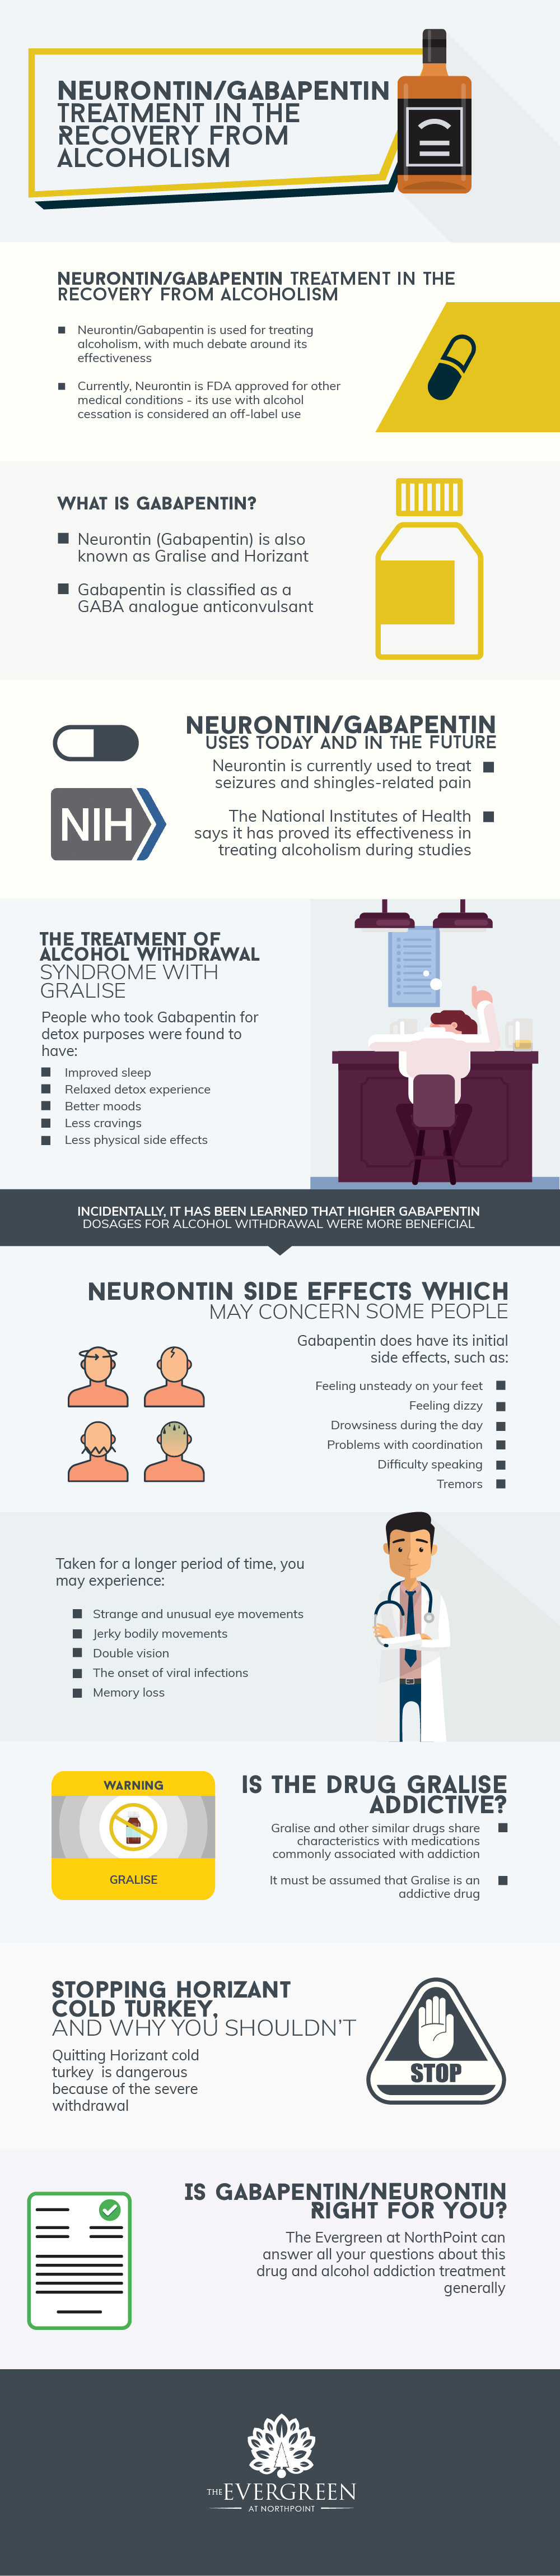 Neurontin Gabapentin Treatment in Recovery from Alcoholism